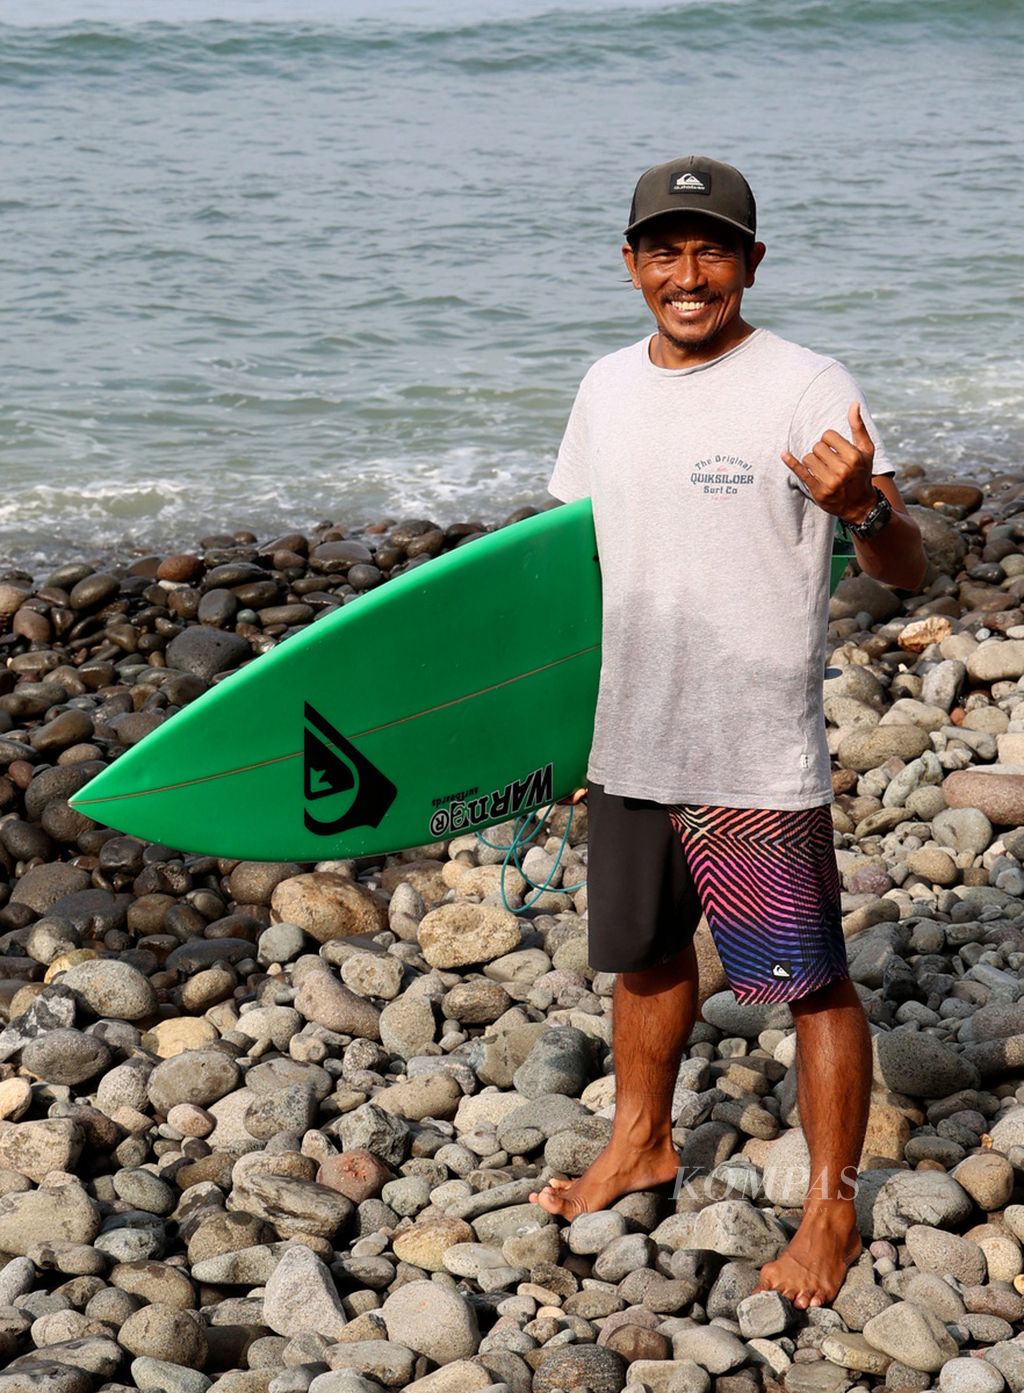 Dede Suryana, a professional surfer from Cimaja, West Java, struck a pose after surfing at Cimaja Beach, Sukabumi Regency, West Java on Wednesday (24/5/2023).